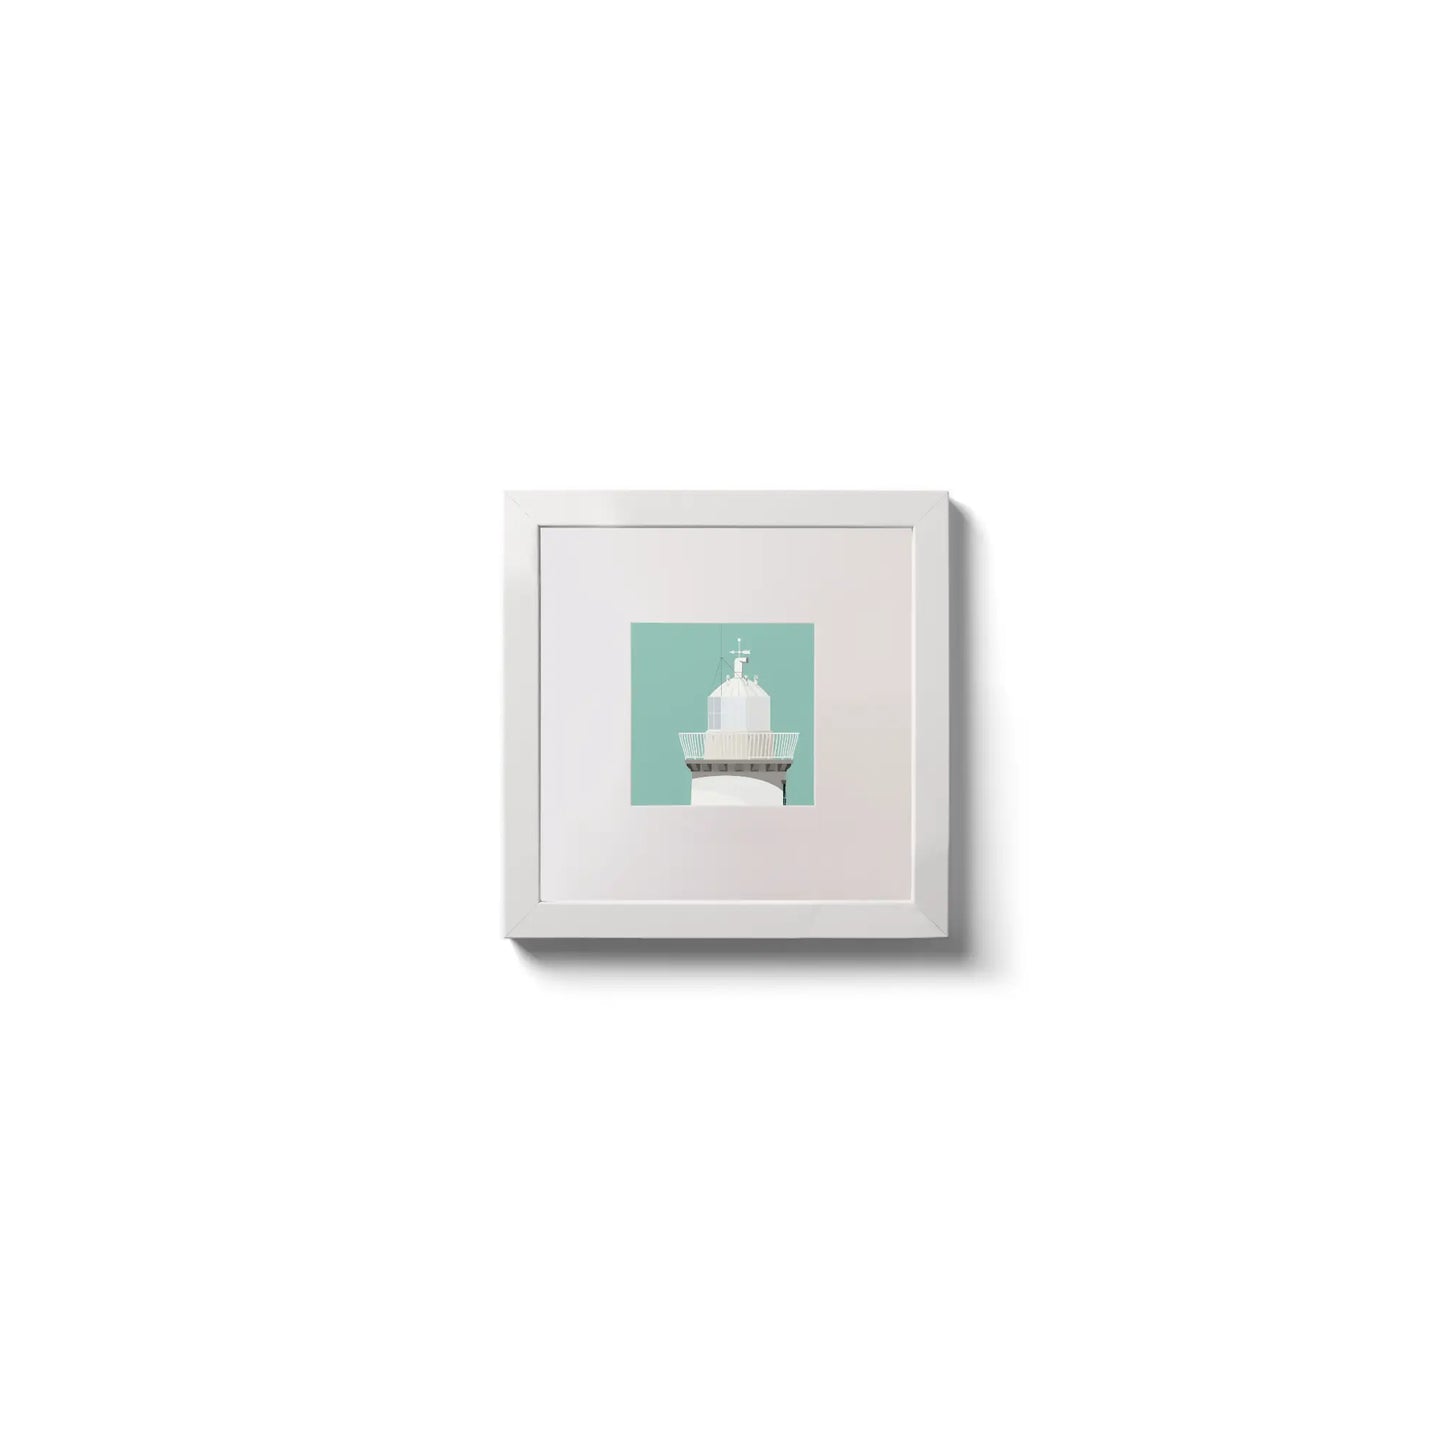 Illustration  Duncannon North lighthouse on an ocean green background,  in a white square frame measuring 10x10cm.